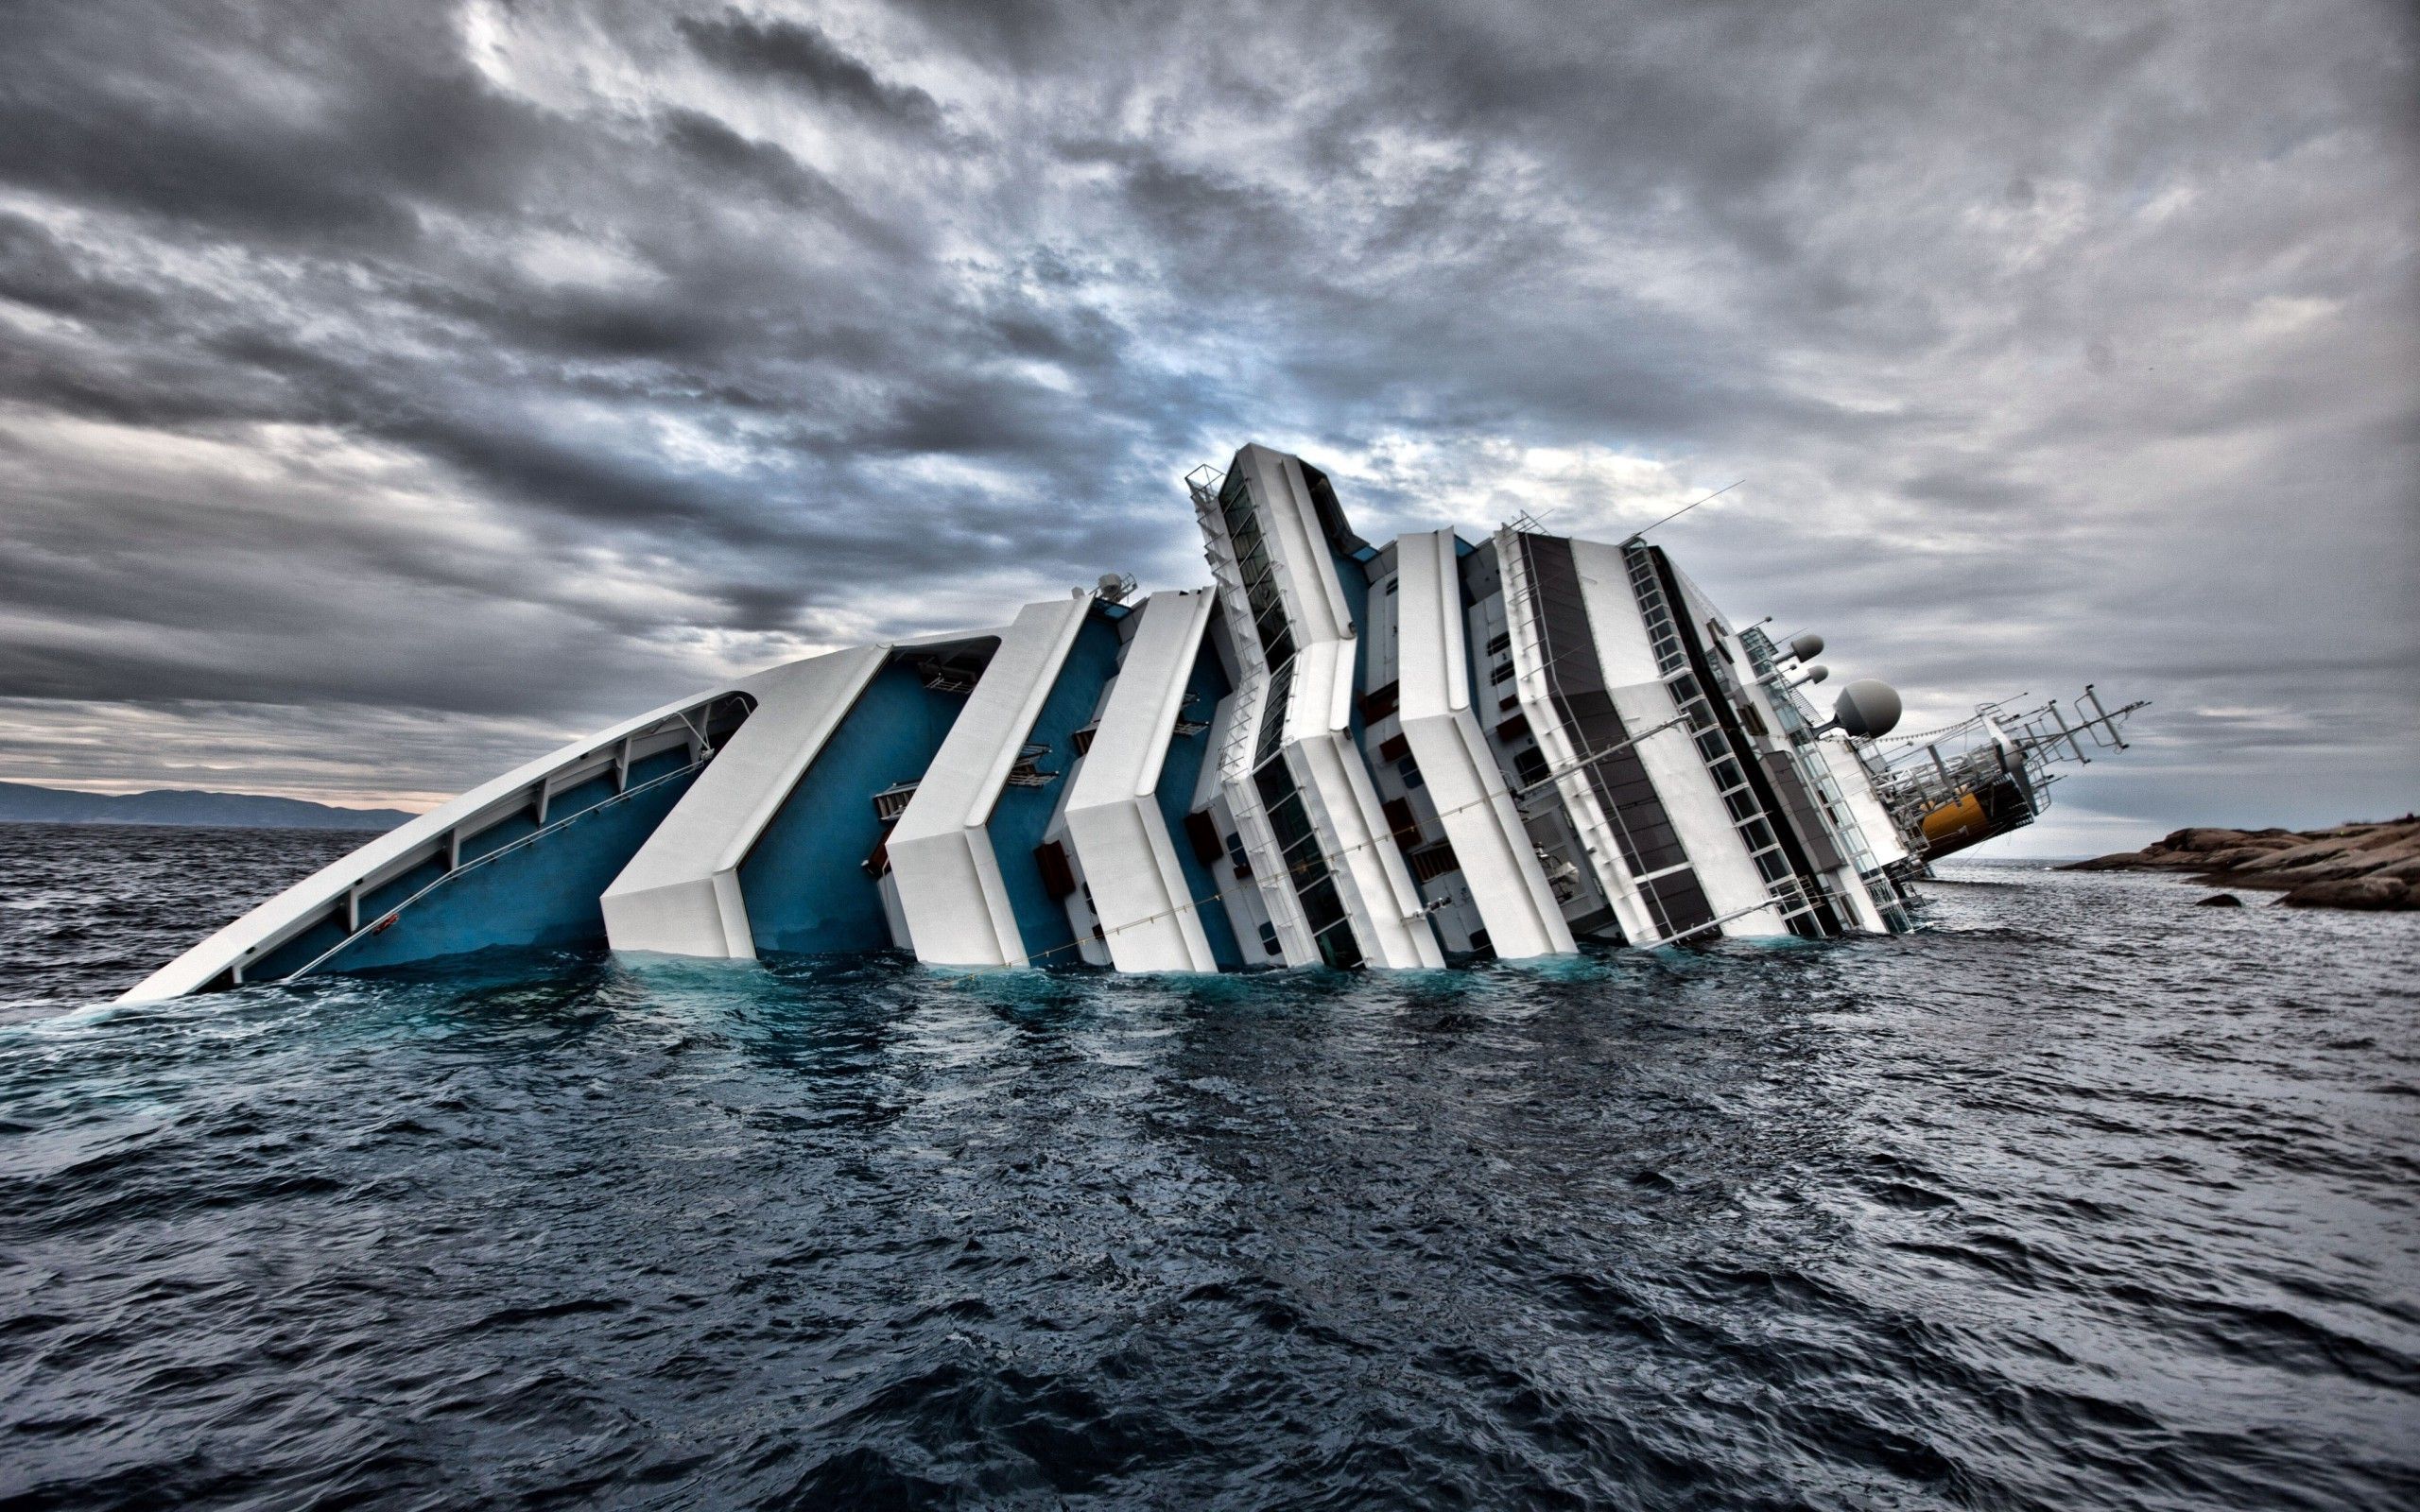 Costa Concordia, Disaster, Crash, Ship, Cruise ship, Sea, Clouds, Sinking ships Wallpaper HD / Desktop and Mobile Background